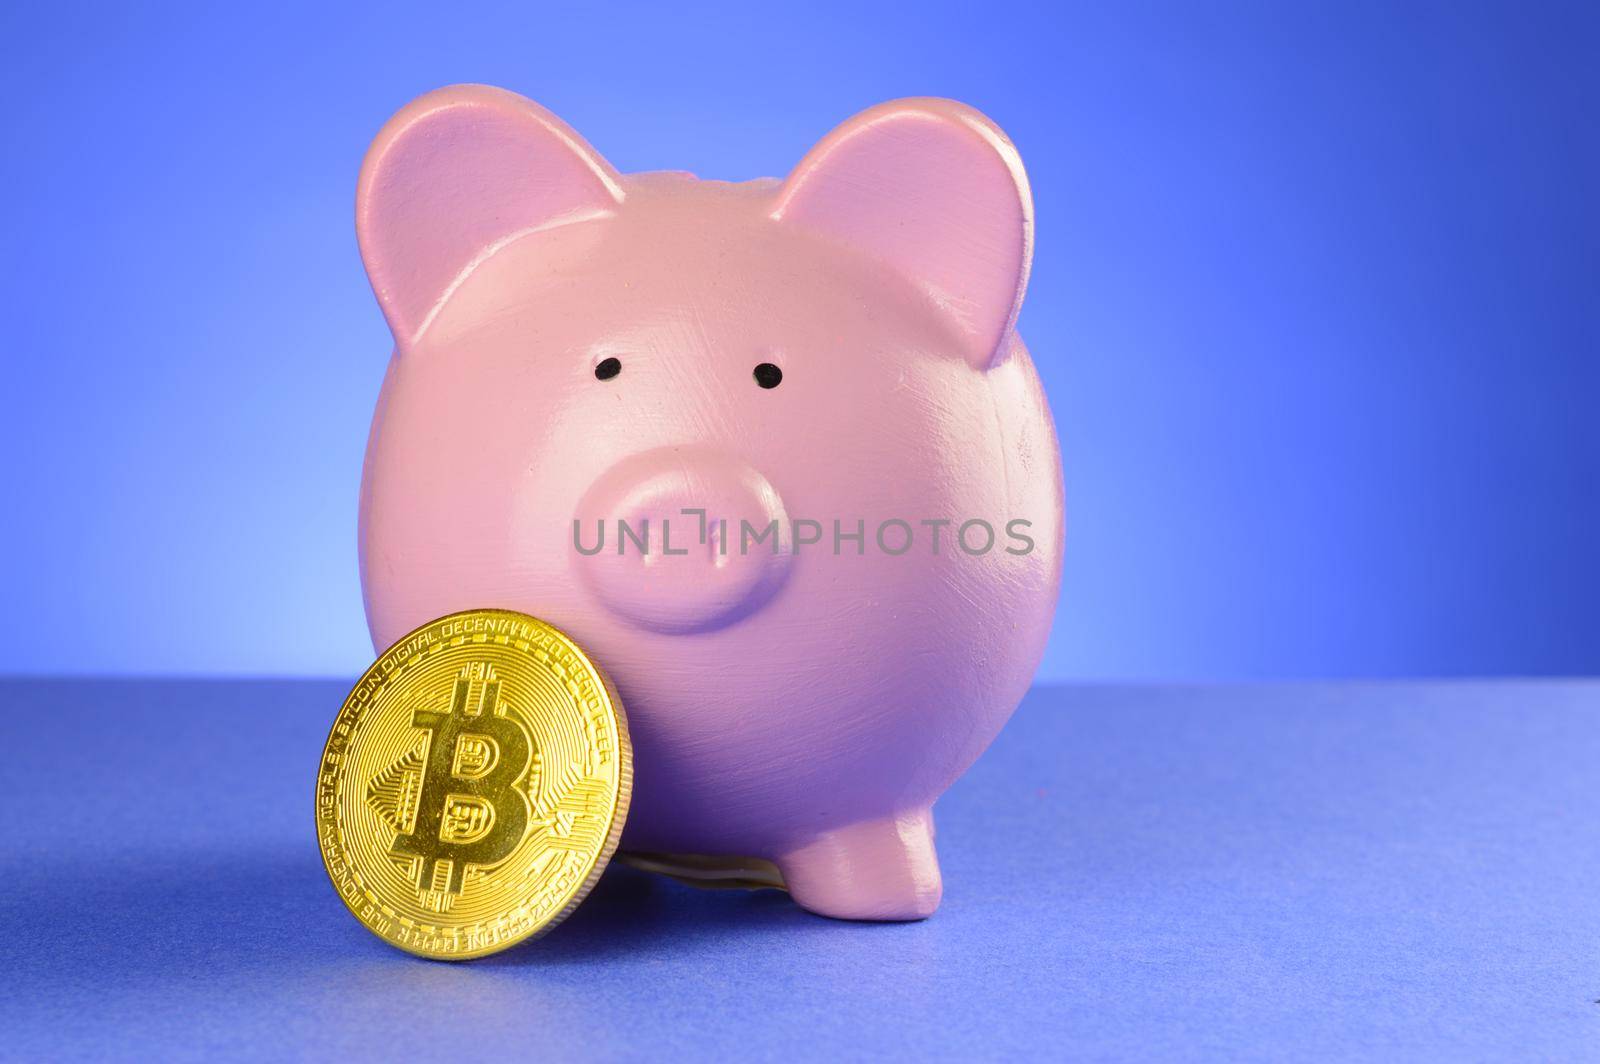 A conceptual image of a piggy bank and bitcoin to represent the cryptocurrency cash accounts.